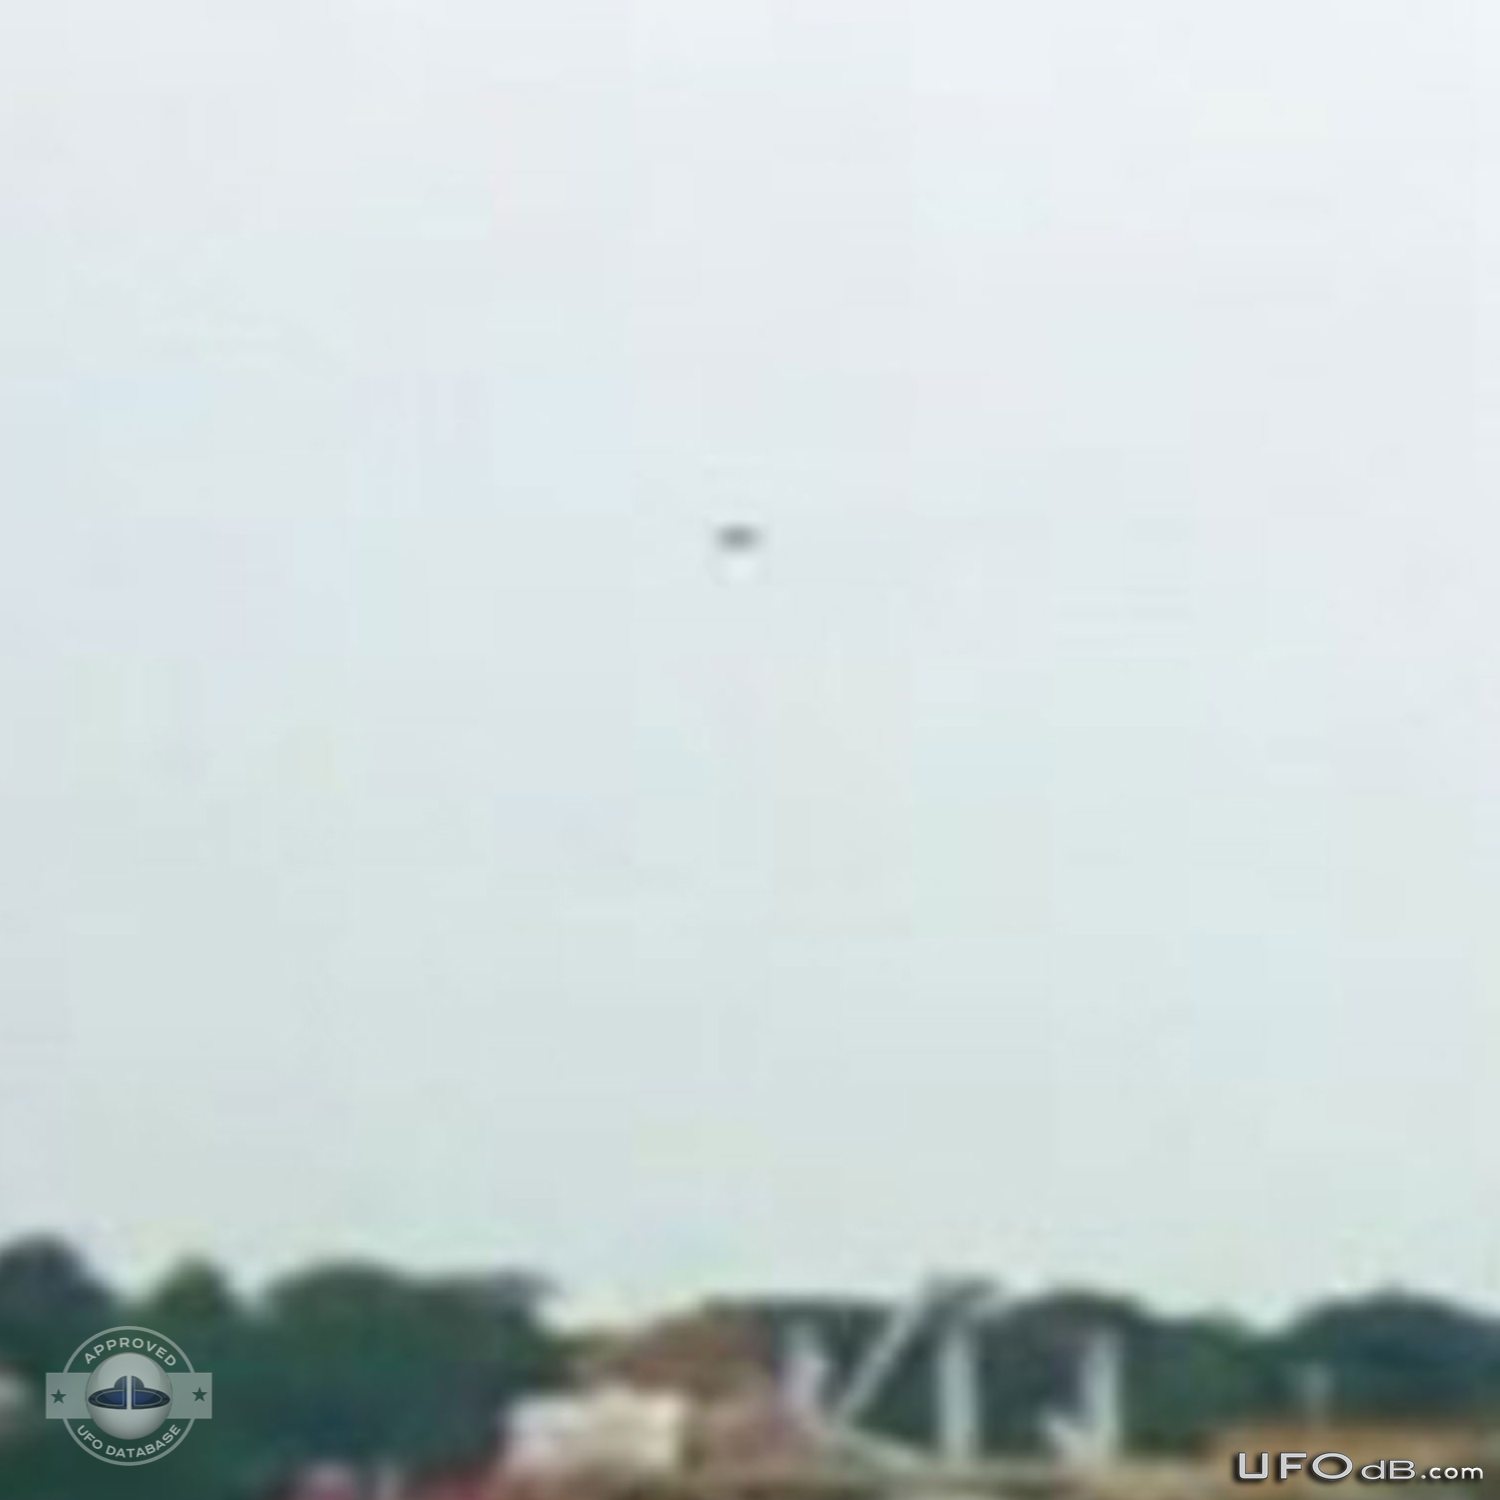 UFO caught on picture near the Resort World Sentosa in Singapore 2010 UFO Picture #393-3